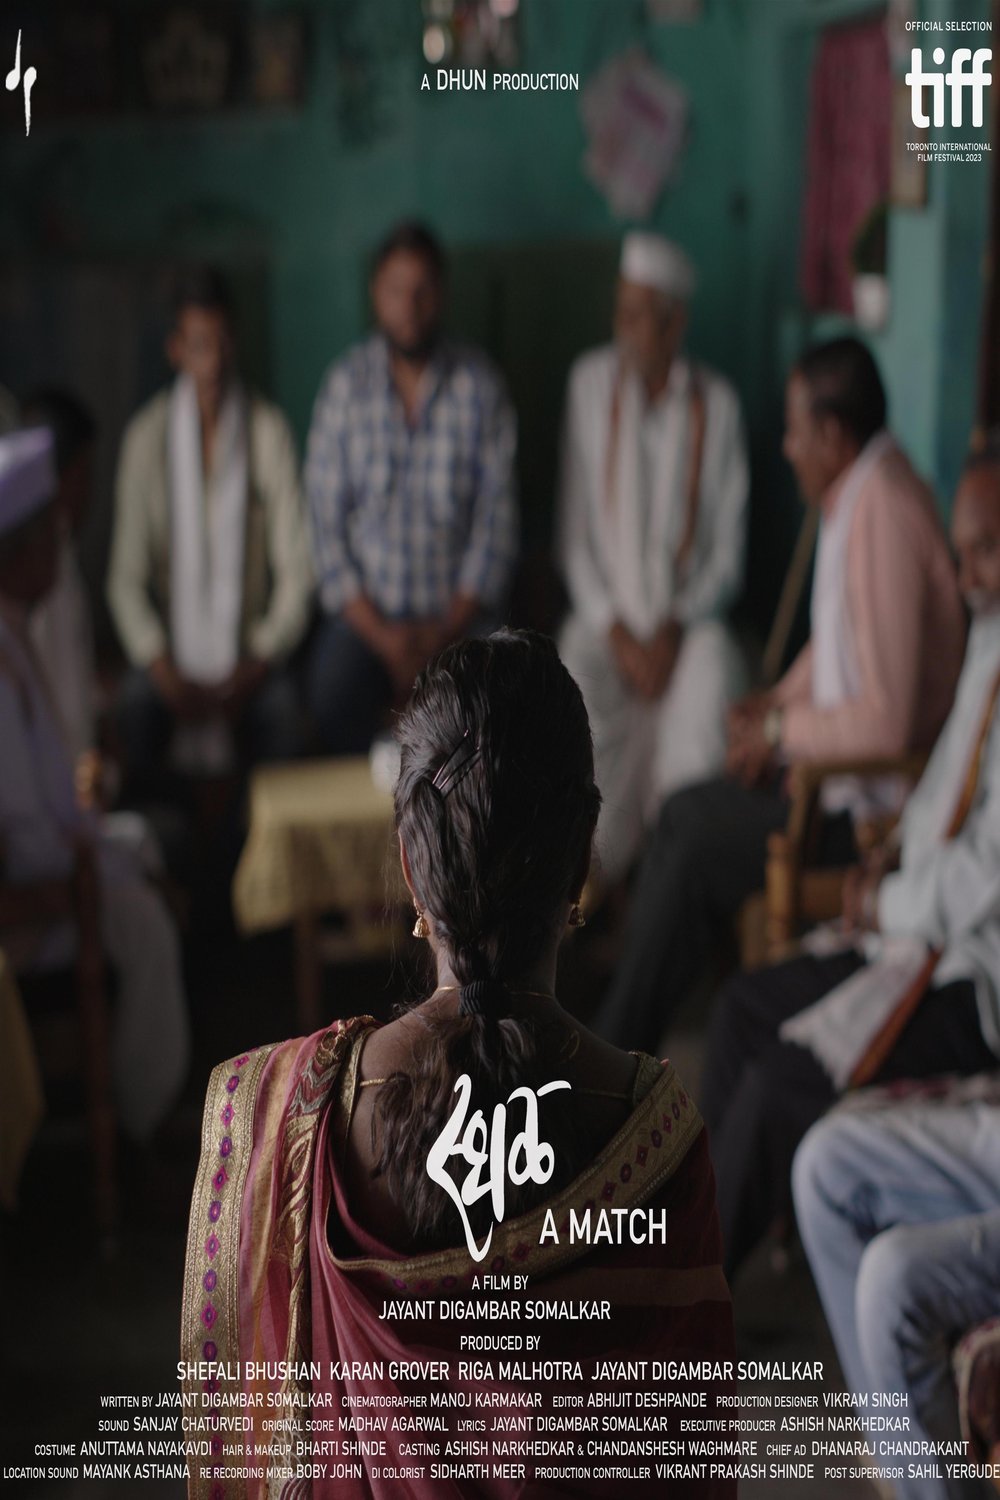 Marathi poster of the movie A Match